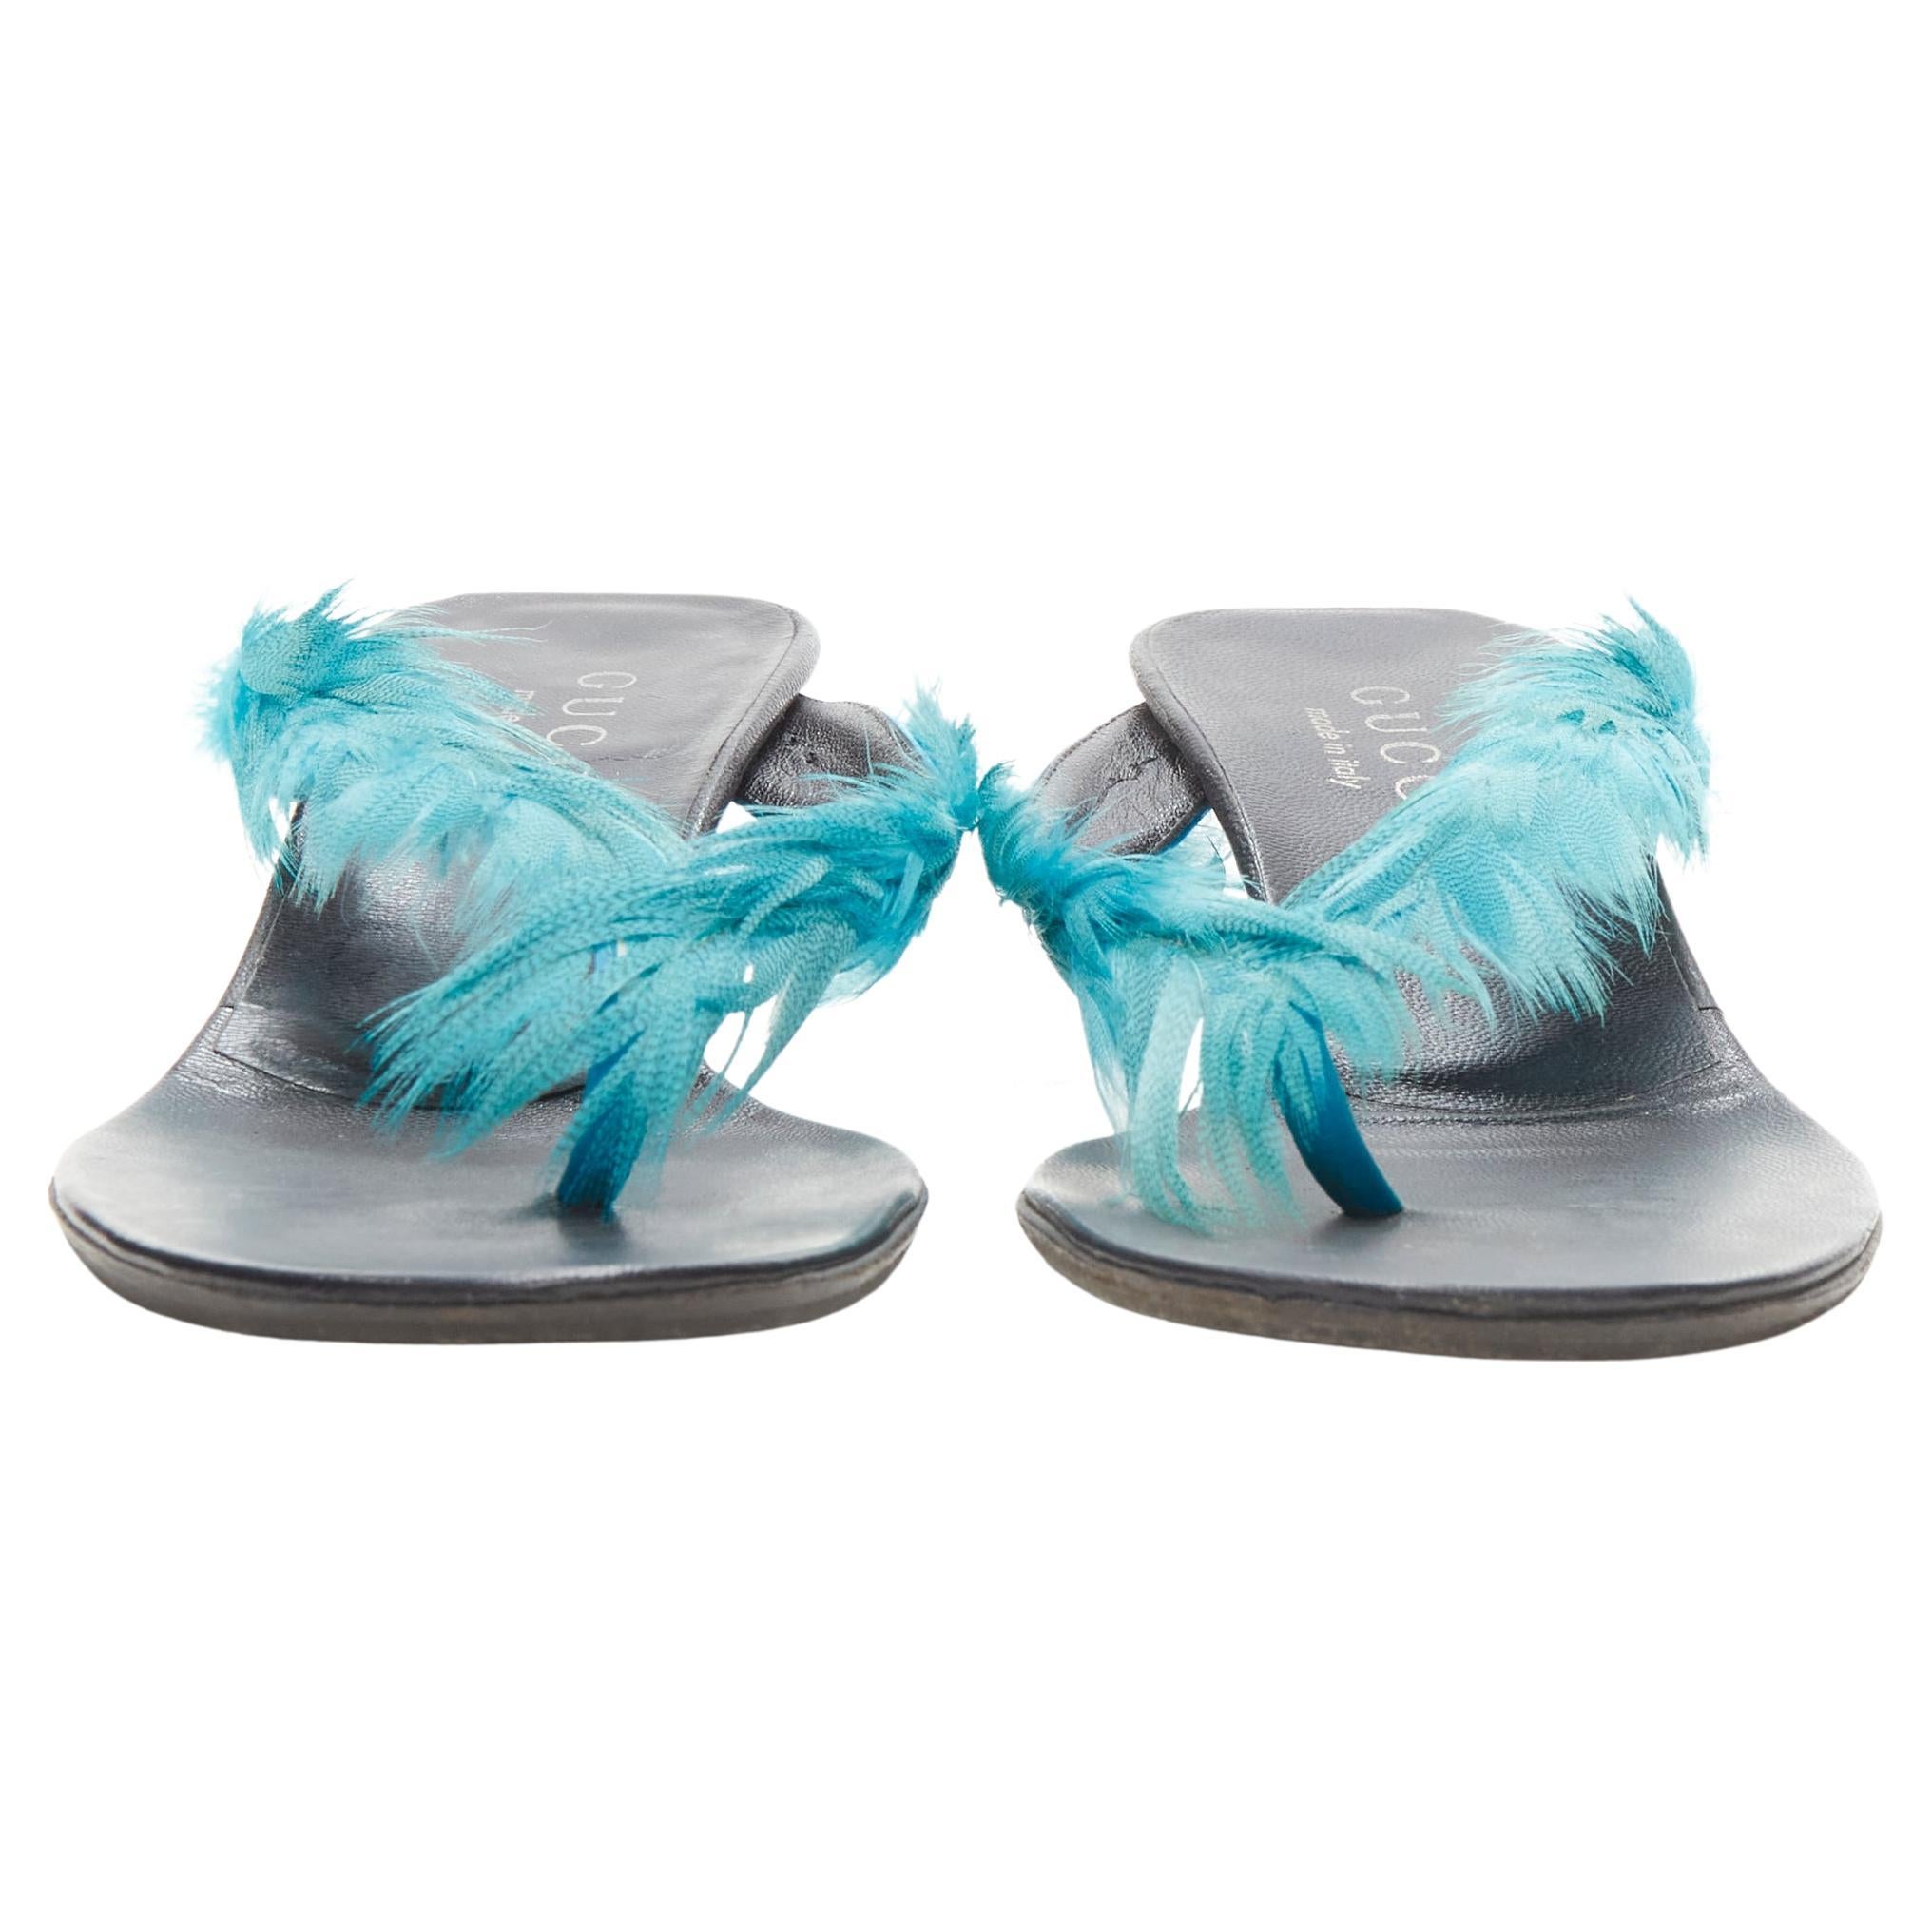 GUCCI TOM FORD 1999 Vintage blue feather thong high heel sandal EU35.5
Brand: Gucci
Designer: Tom Ford
Collection: 1999 Runway
Material: Feather
Color: Blue
Pattern: Solid
Extra Detail: Thong mid heel slipper. Comma heel.
Made in: